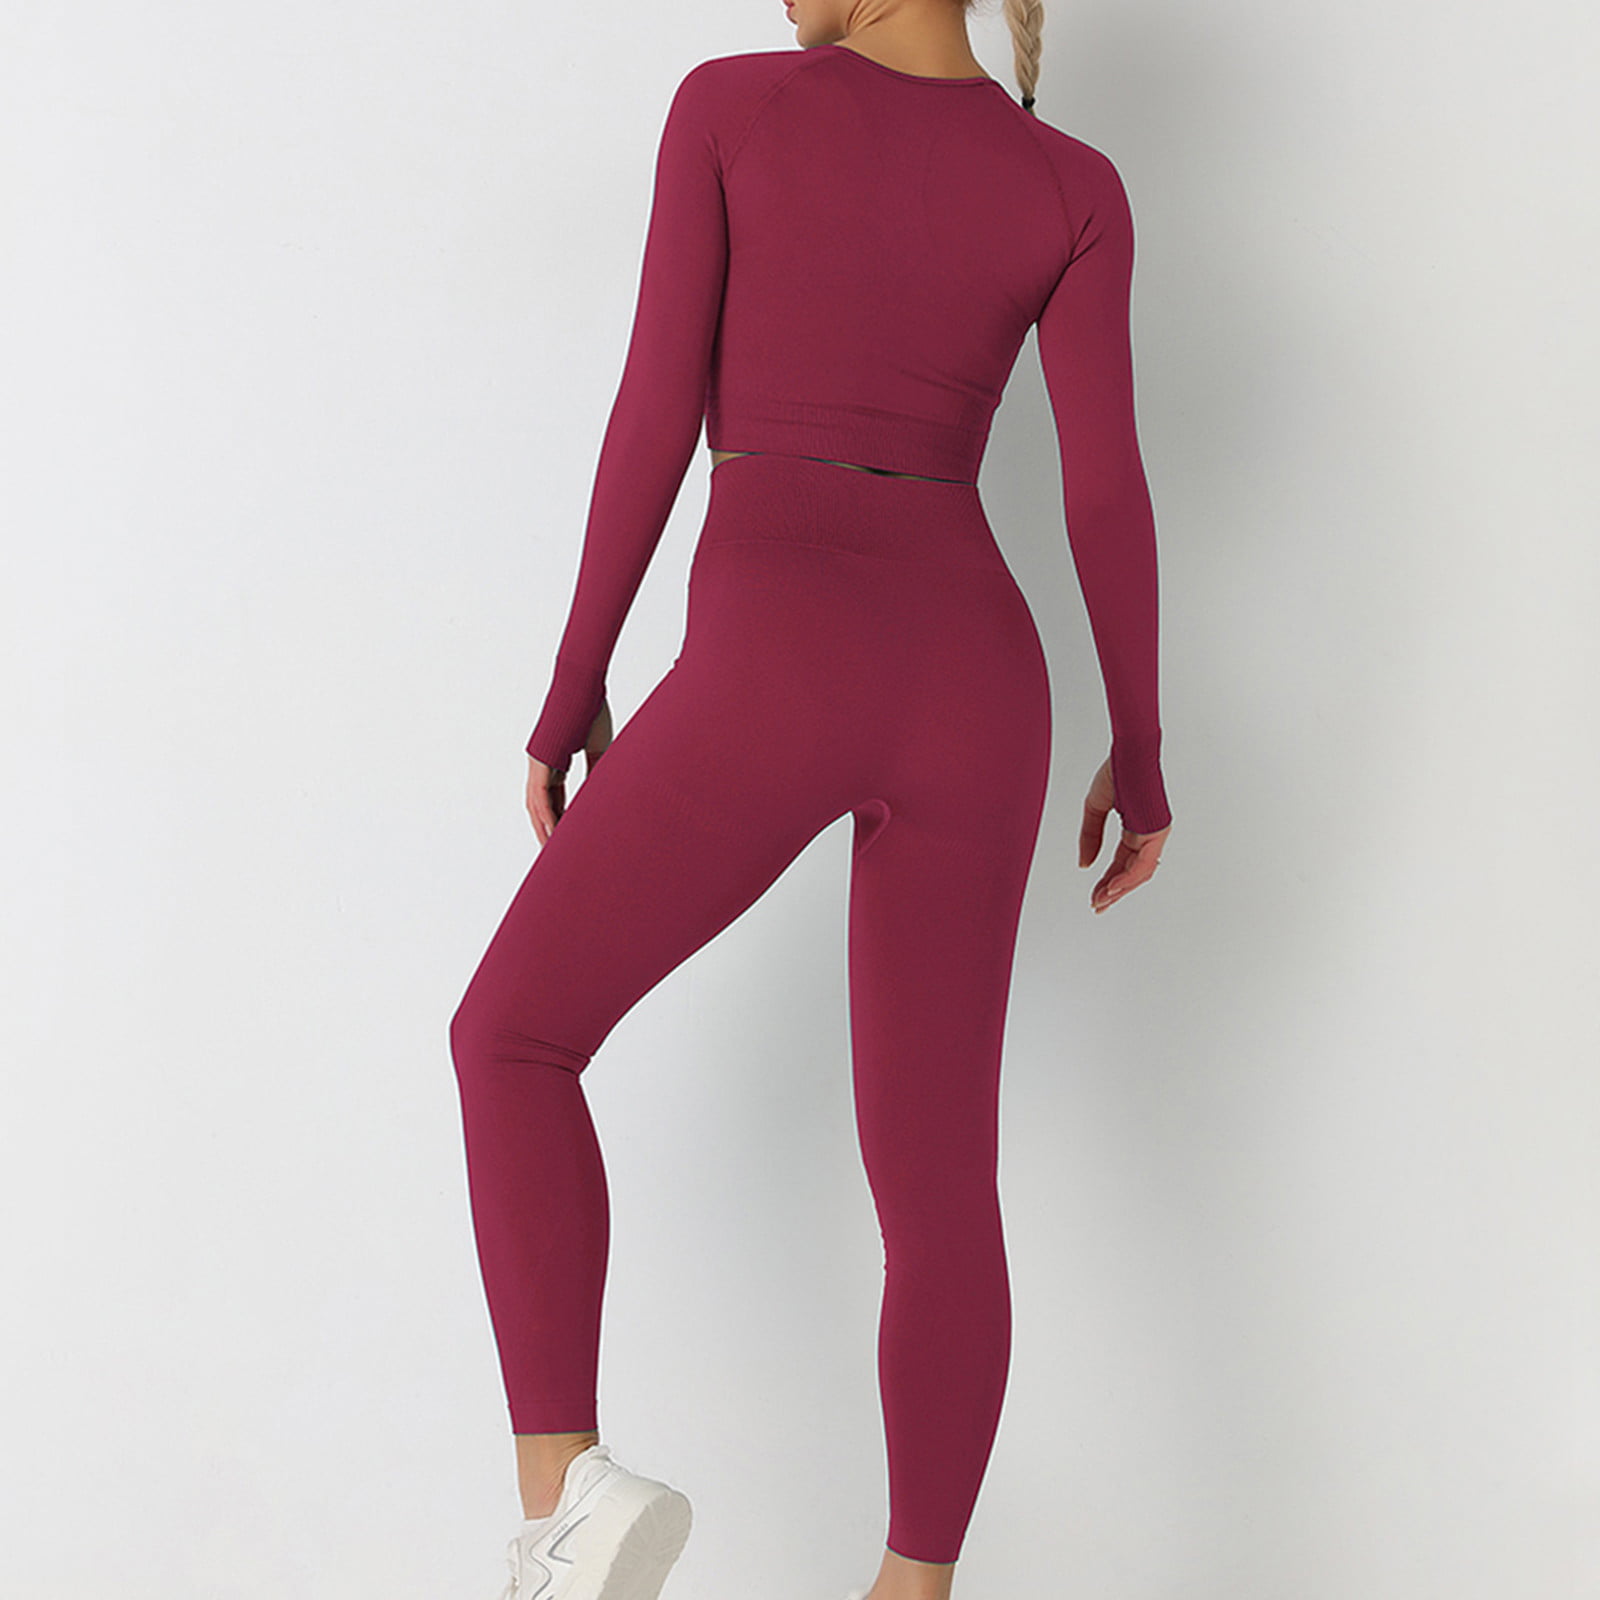 2 In 1 Hyperreflex Cute Yoga Pants Outfits For Women Needless, Layered, And  Top Quality Gym Clothes From Original88, $36.59